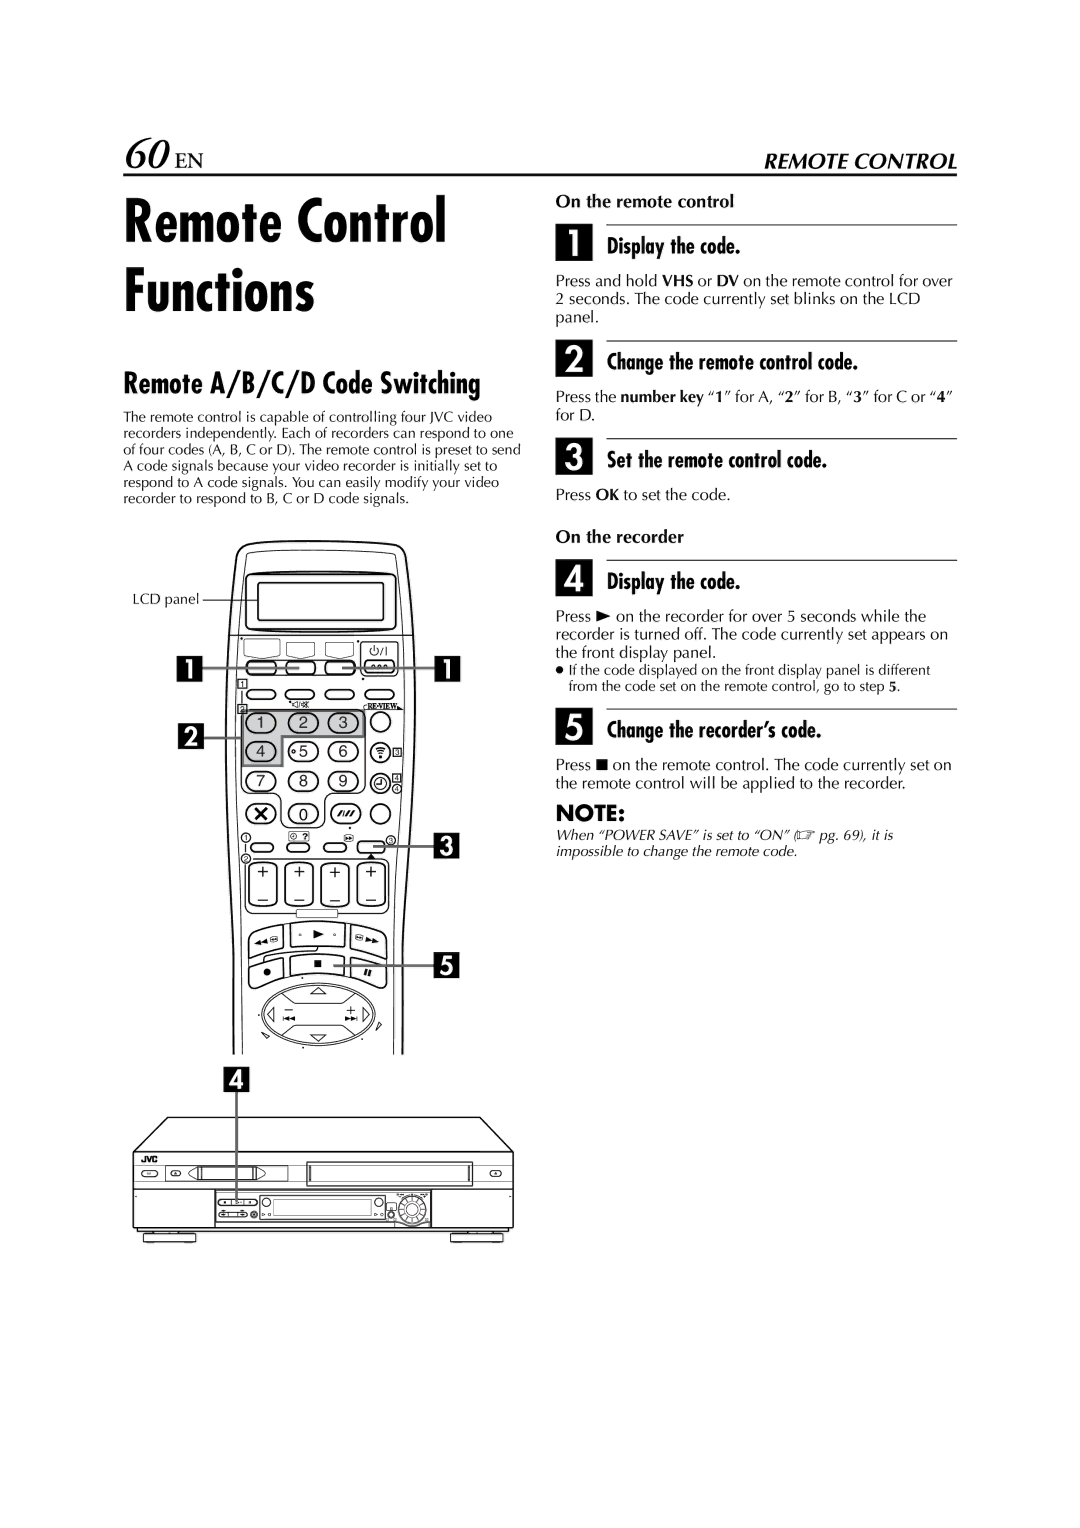 JVC LPT0640-001A specifications 60 EN, Display the code, Change the remote control code, Set the remote control code 